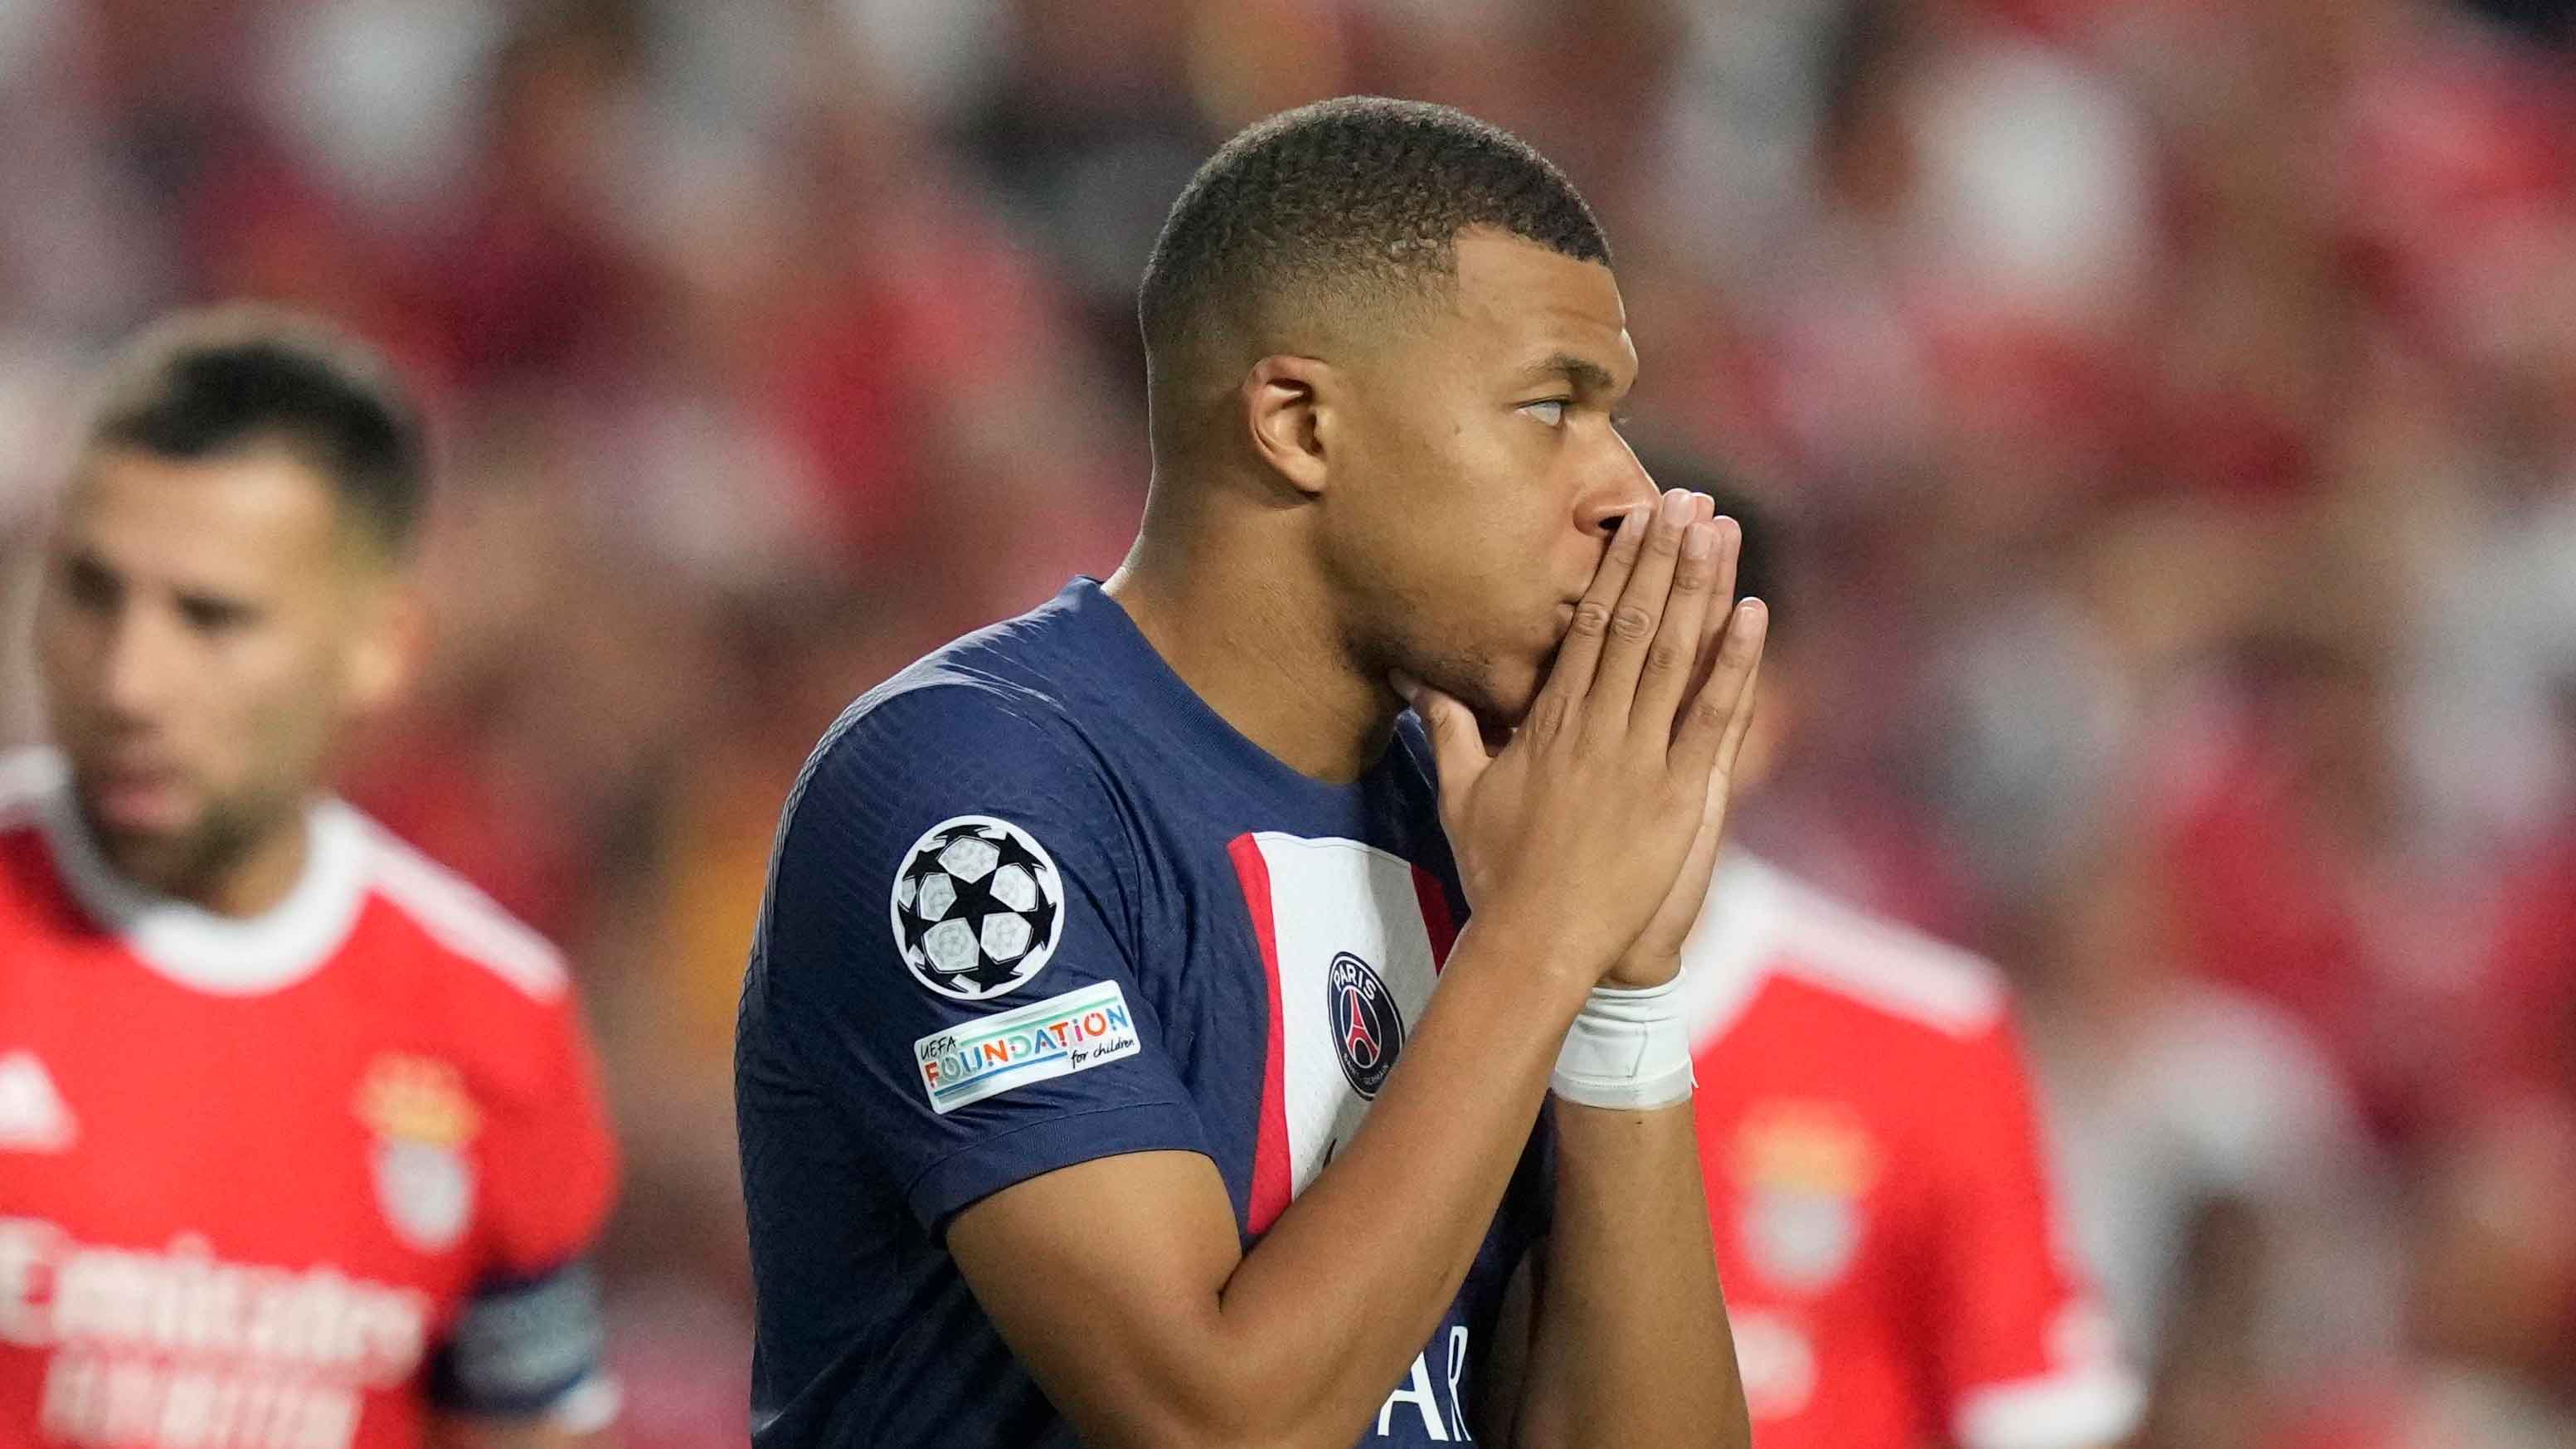 Kylian Mbappe reportedly turns down chance to discuss move to Al